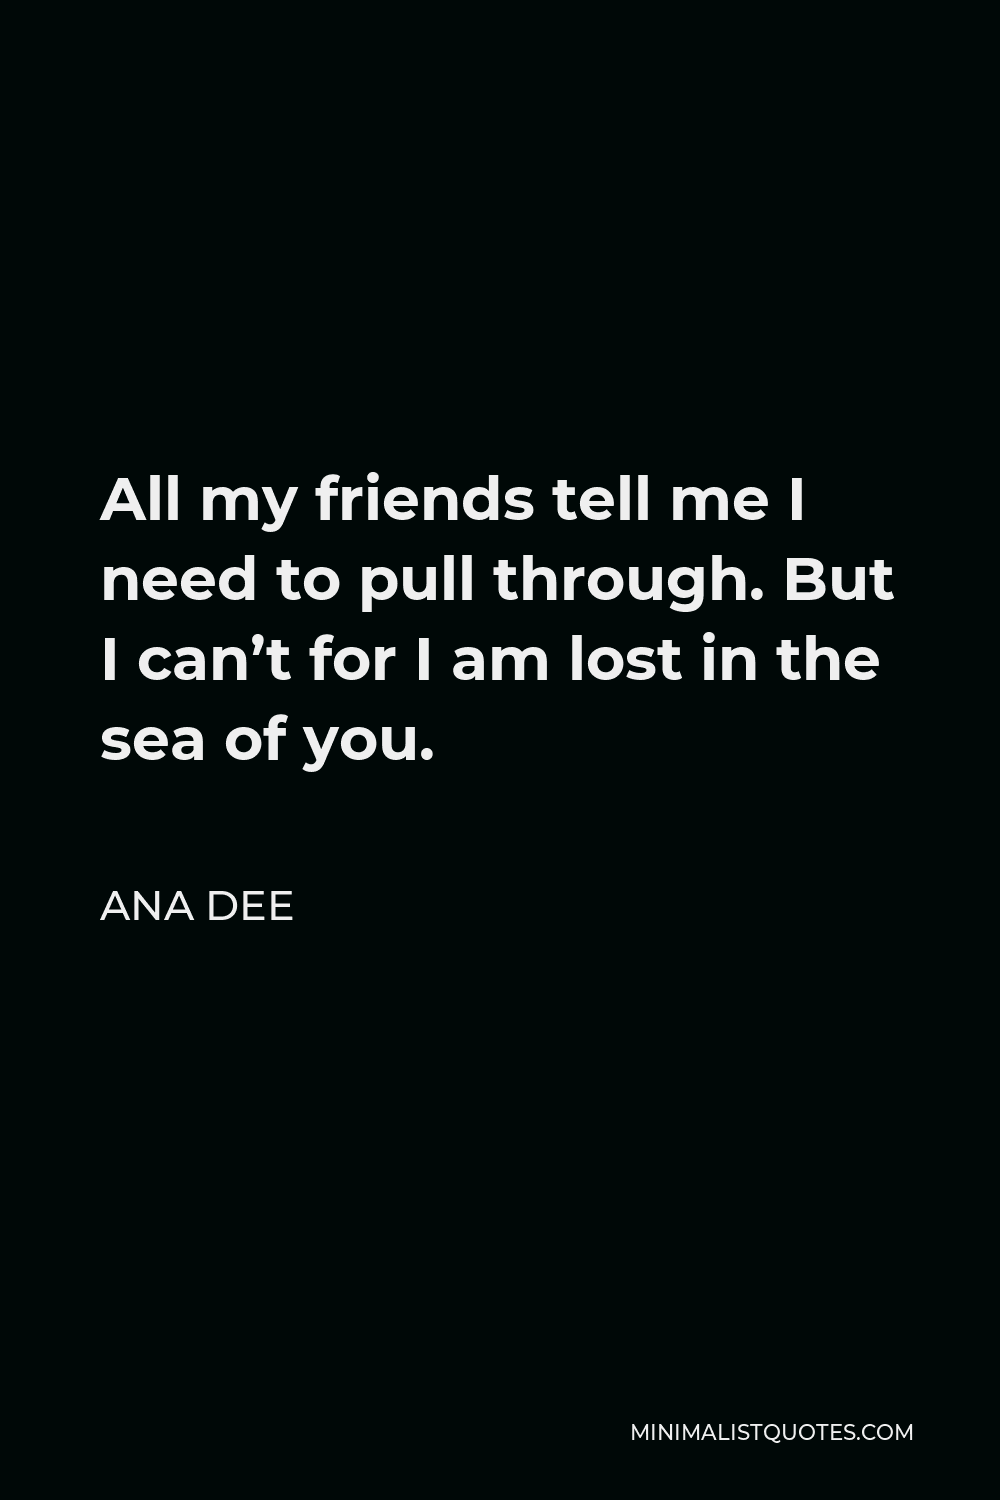 Ana Dee Quote - All my friends tell me I need to pull through. But I can’t for I am lost in the sea of you.